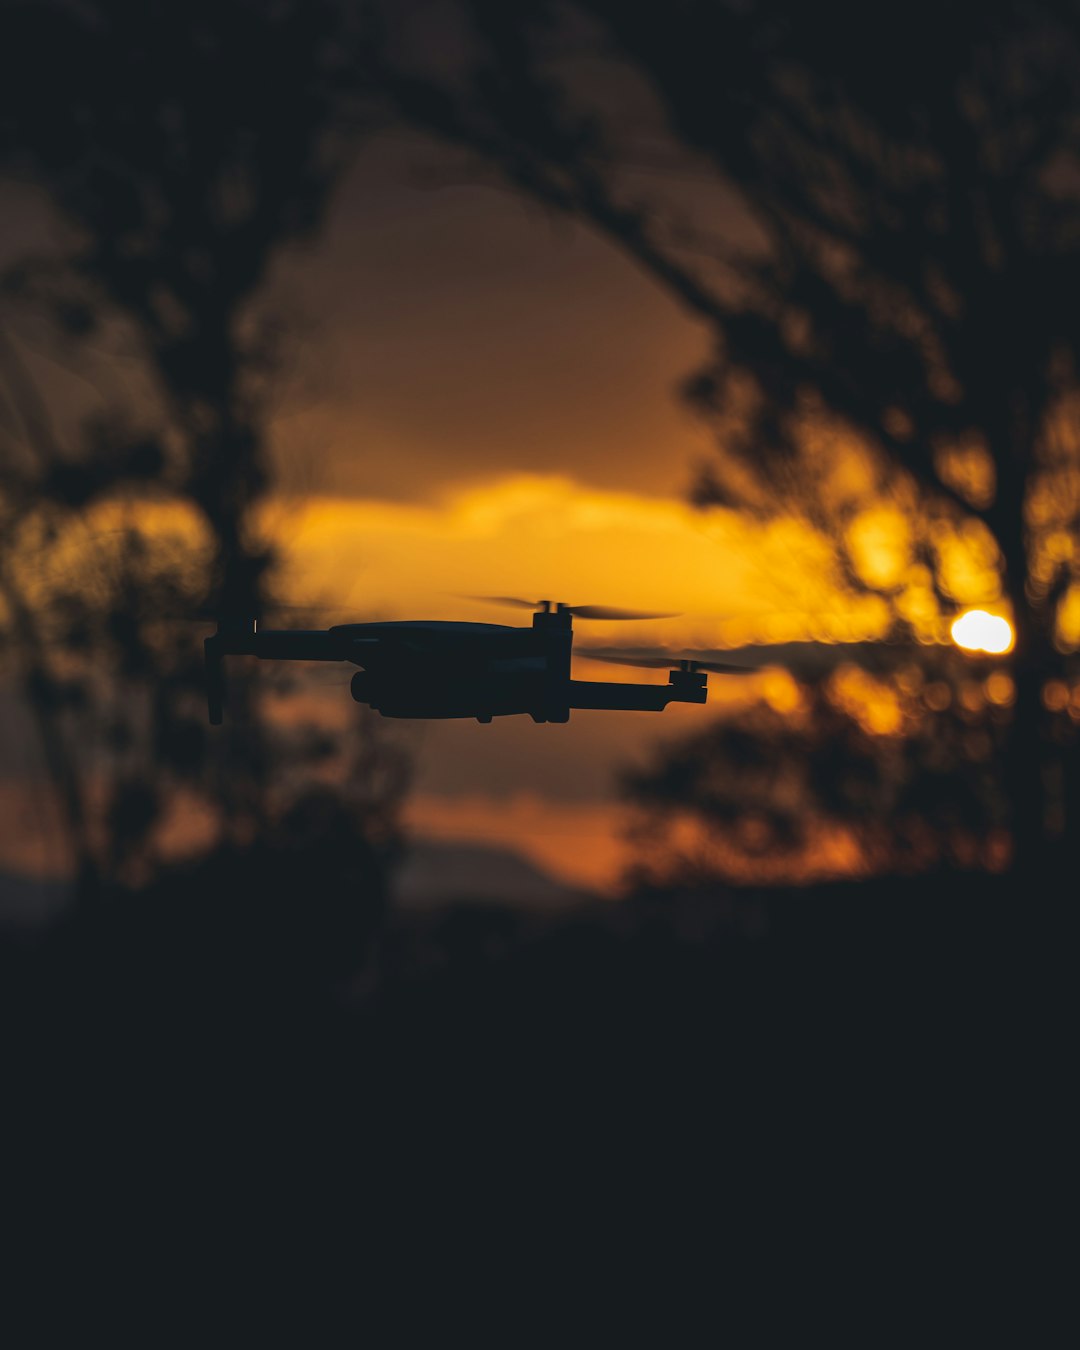 black and white drone flying during sunset